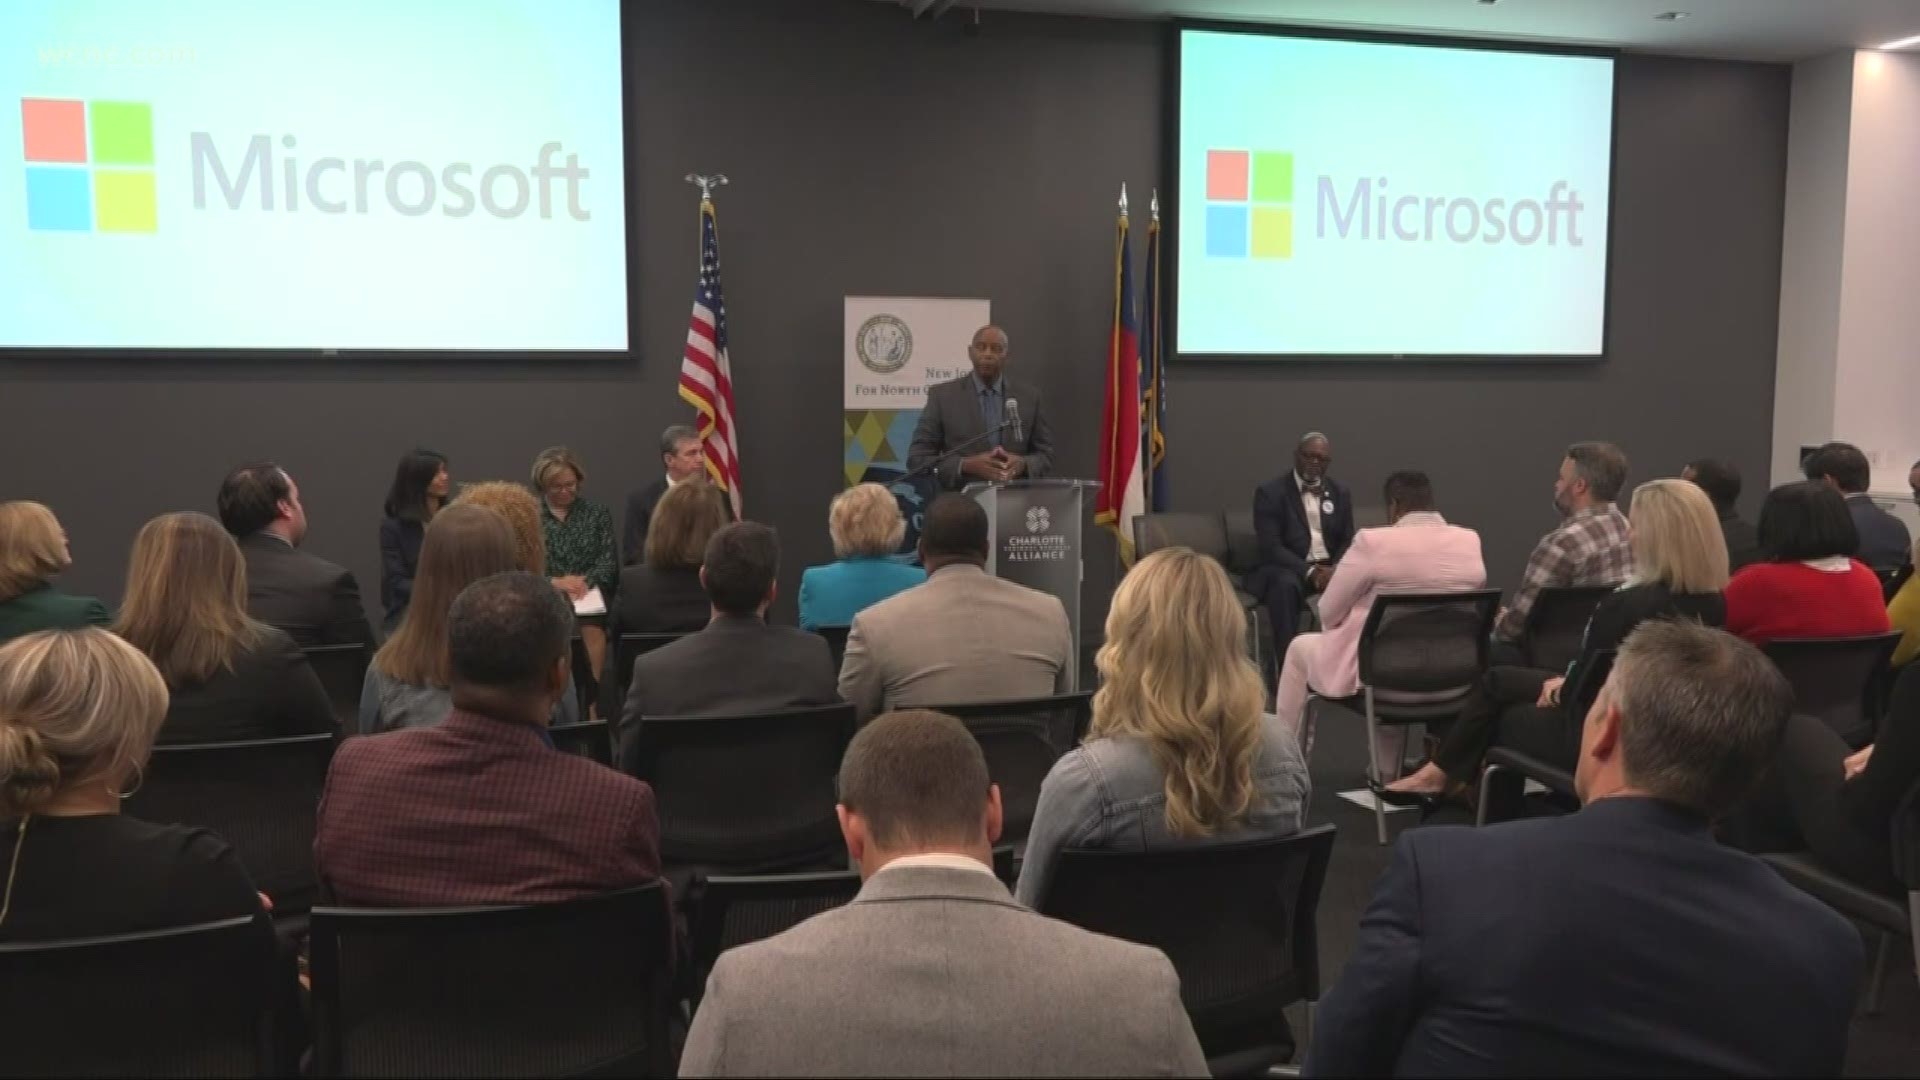 North Carolina Governor Roy Cooper announced the expansion of Microsoft's existing Charlotte campus Friday.